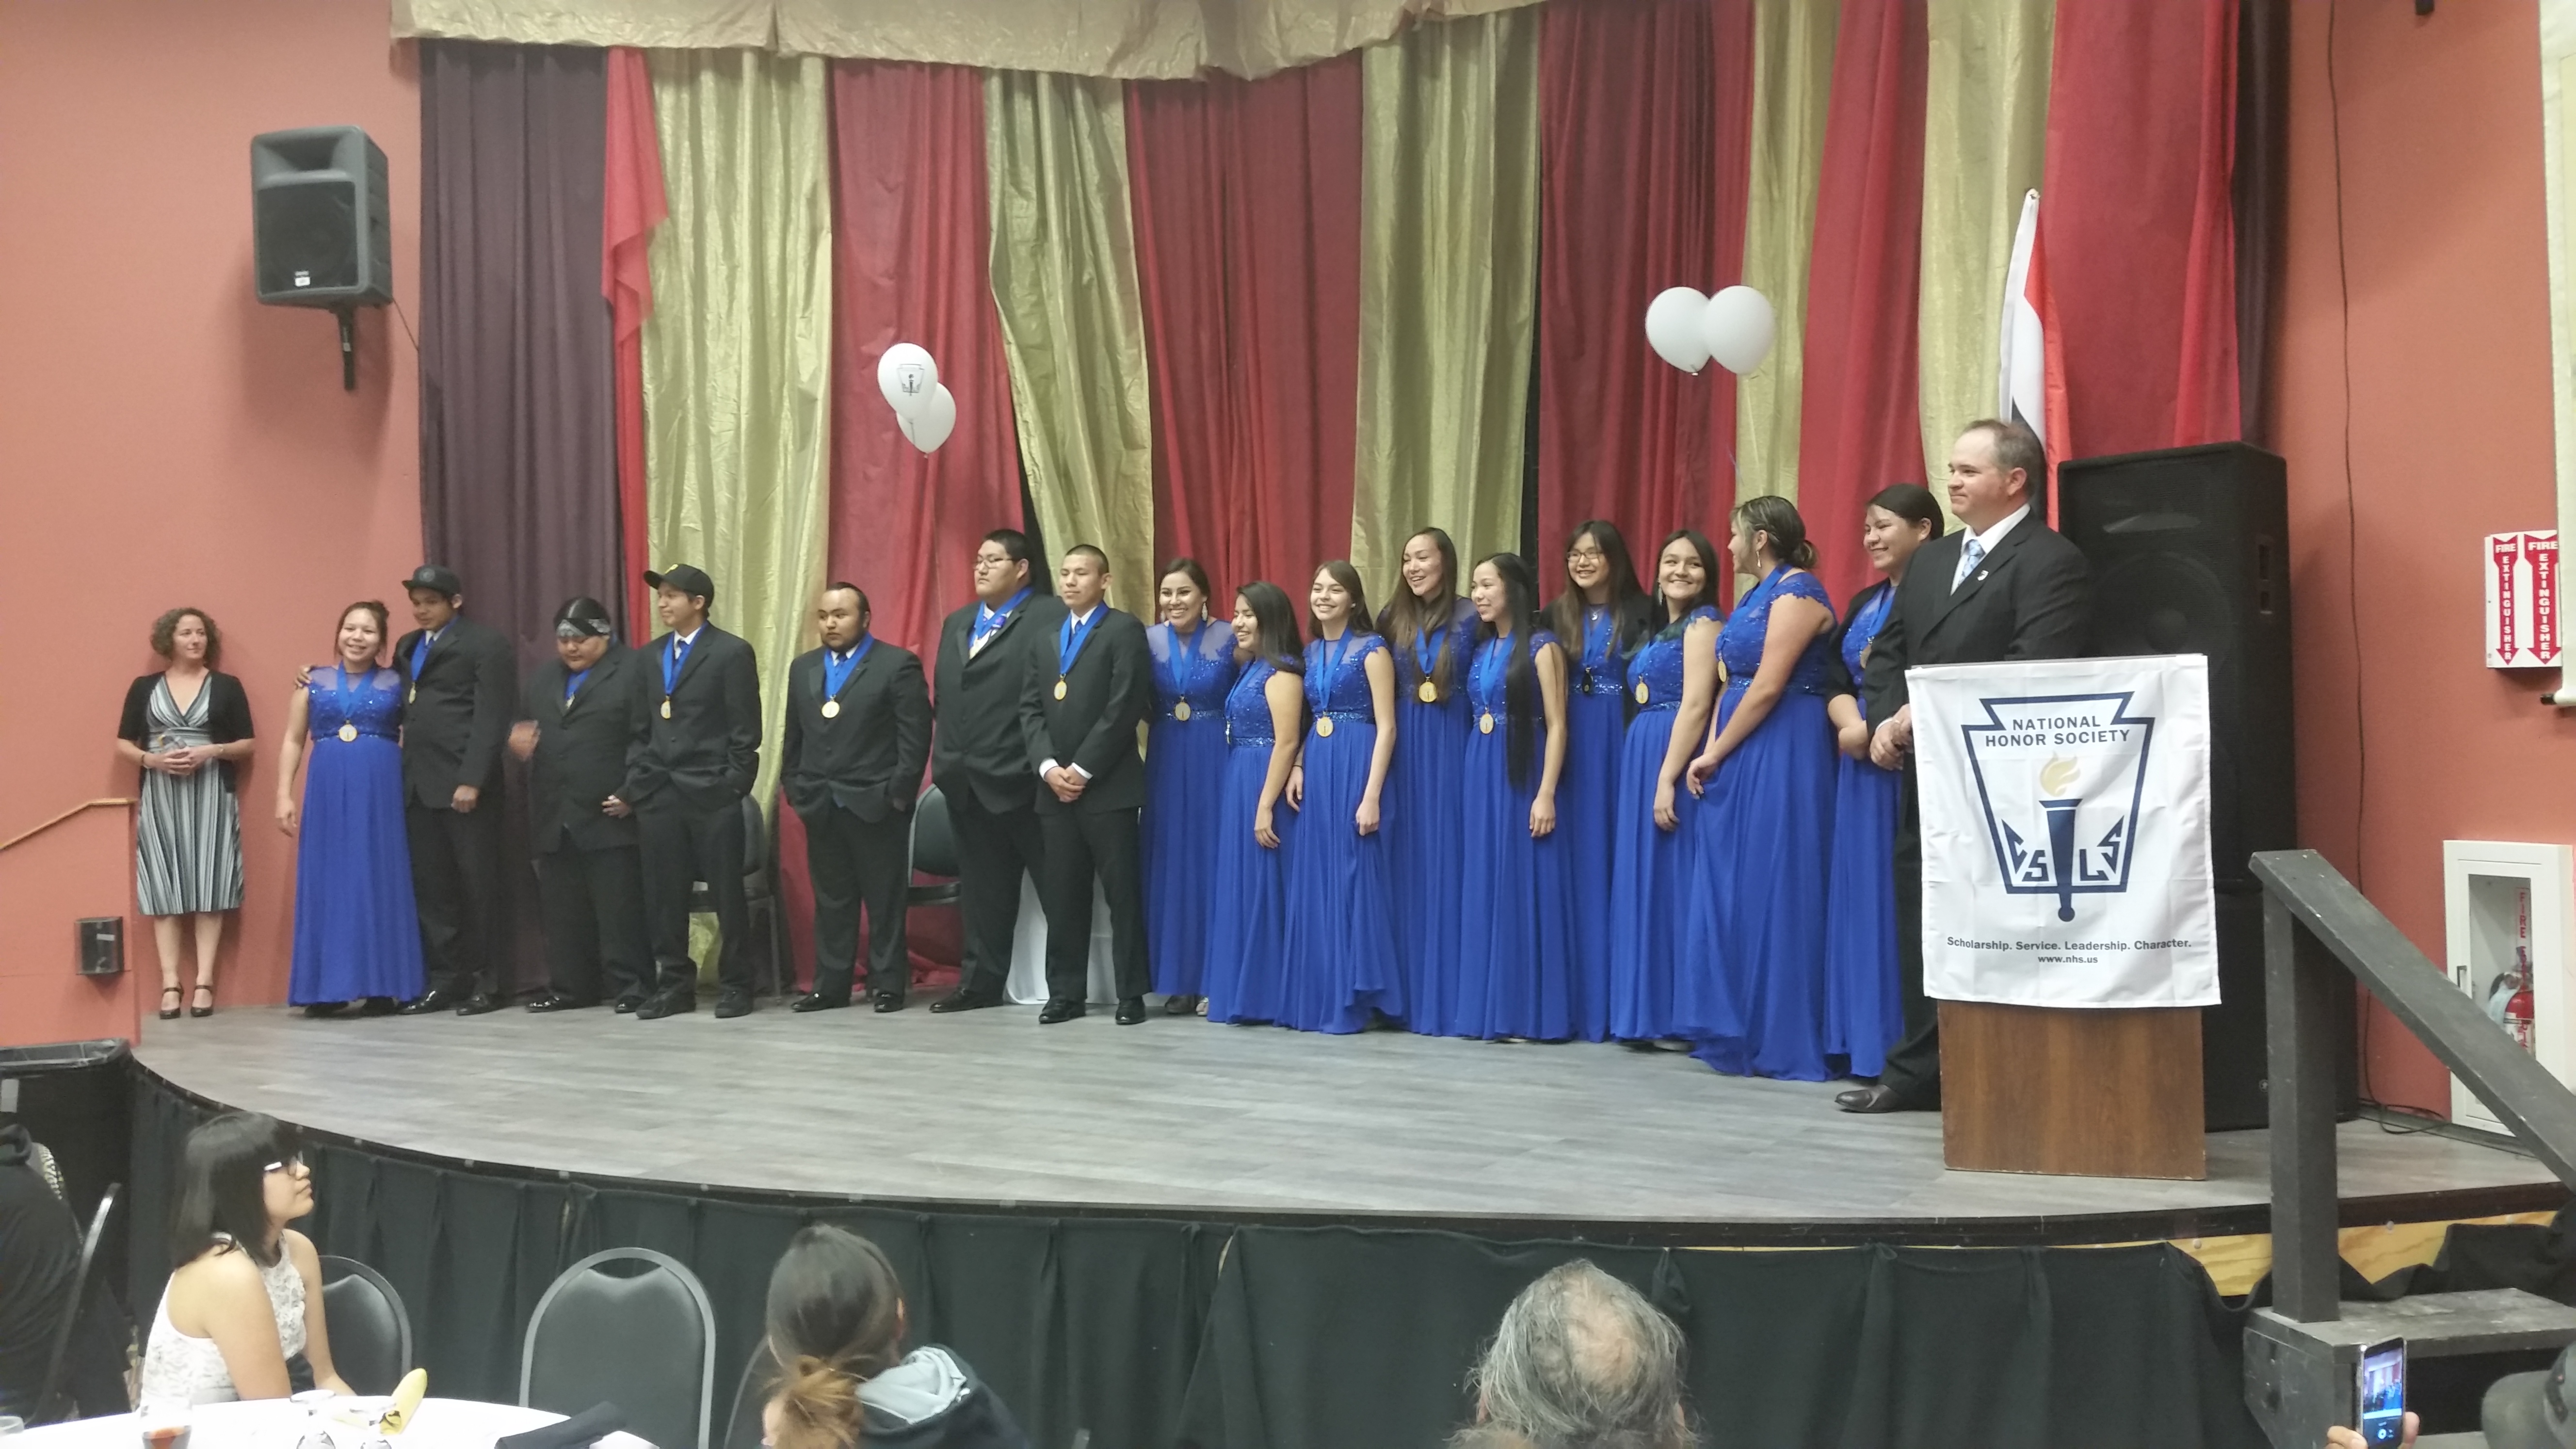 Sixteen students stand smiling on a stage in suits and gowns with their National Honor Society medals around their necks during their induction ceremony.